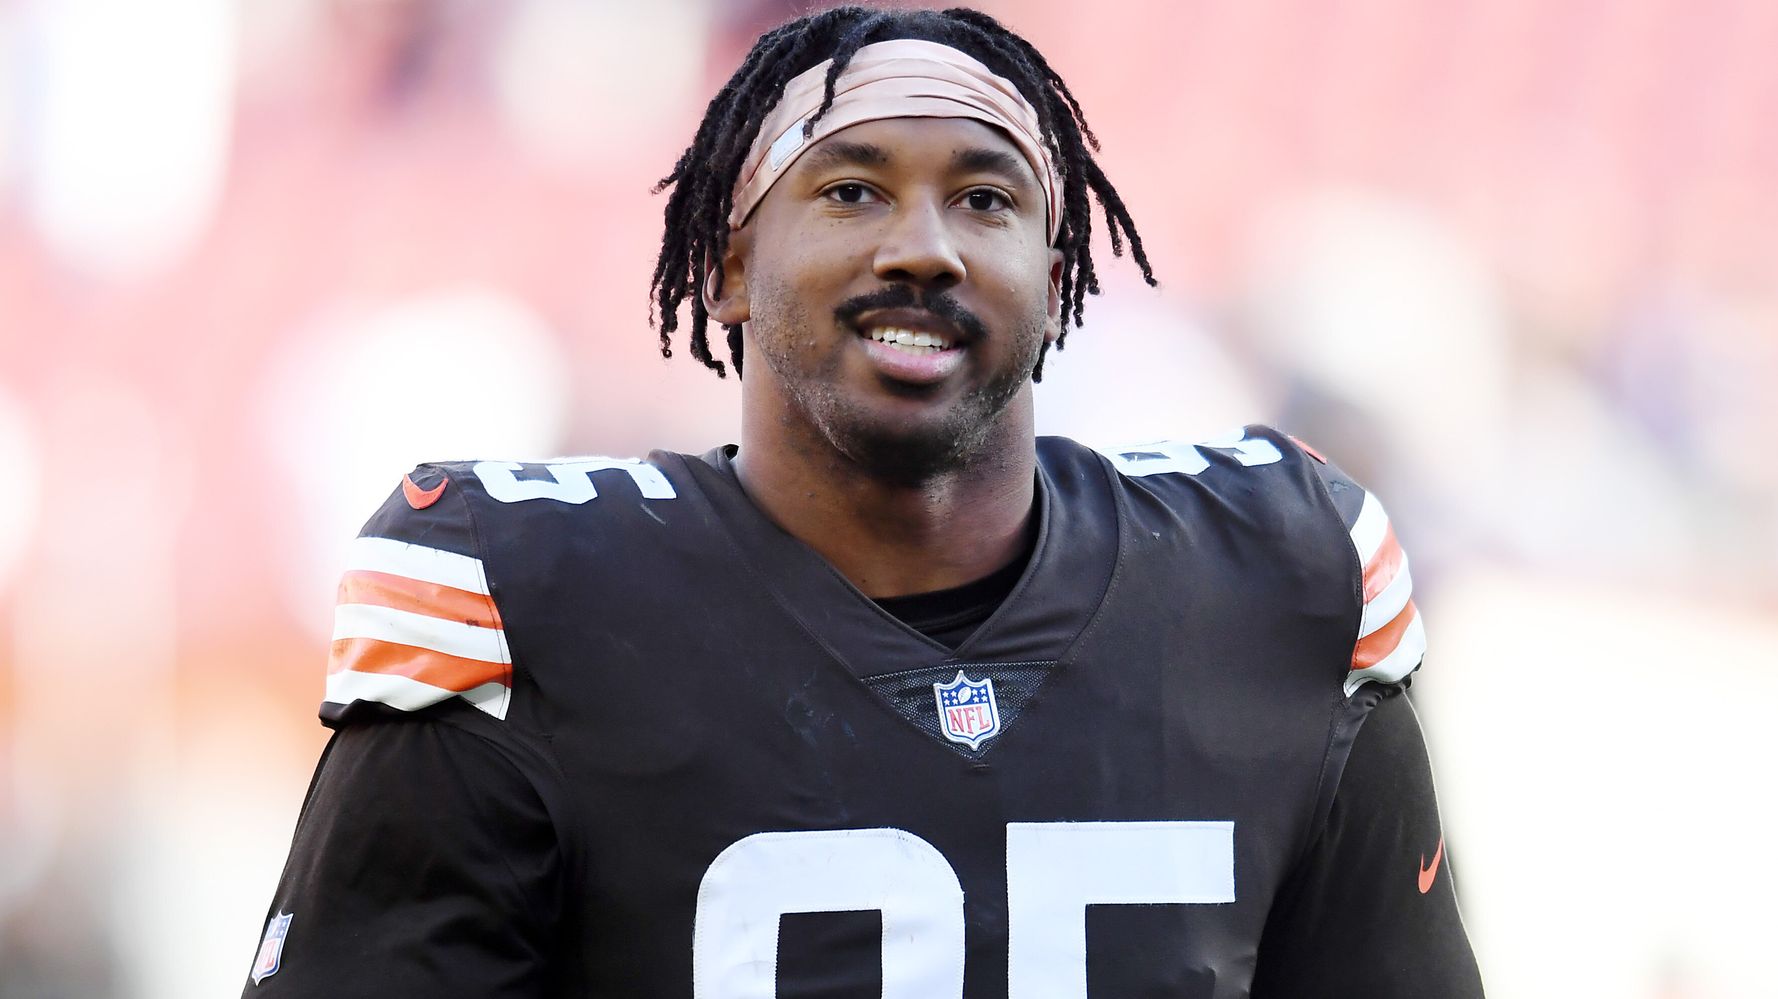 Myles Garrett Wore His Halloween Costume On The Field And Killed It As The Grim Reaper